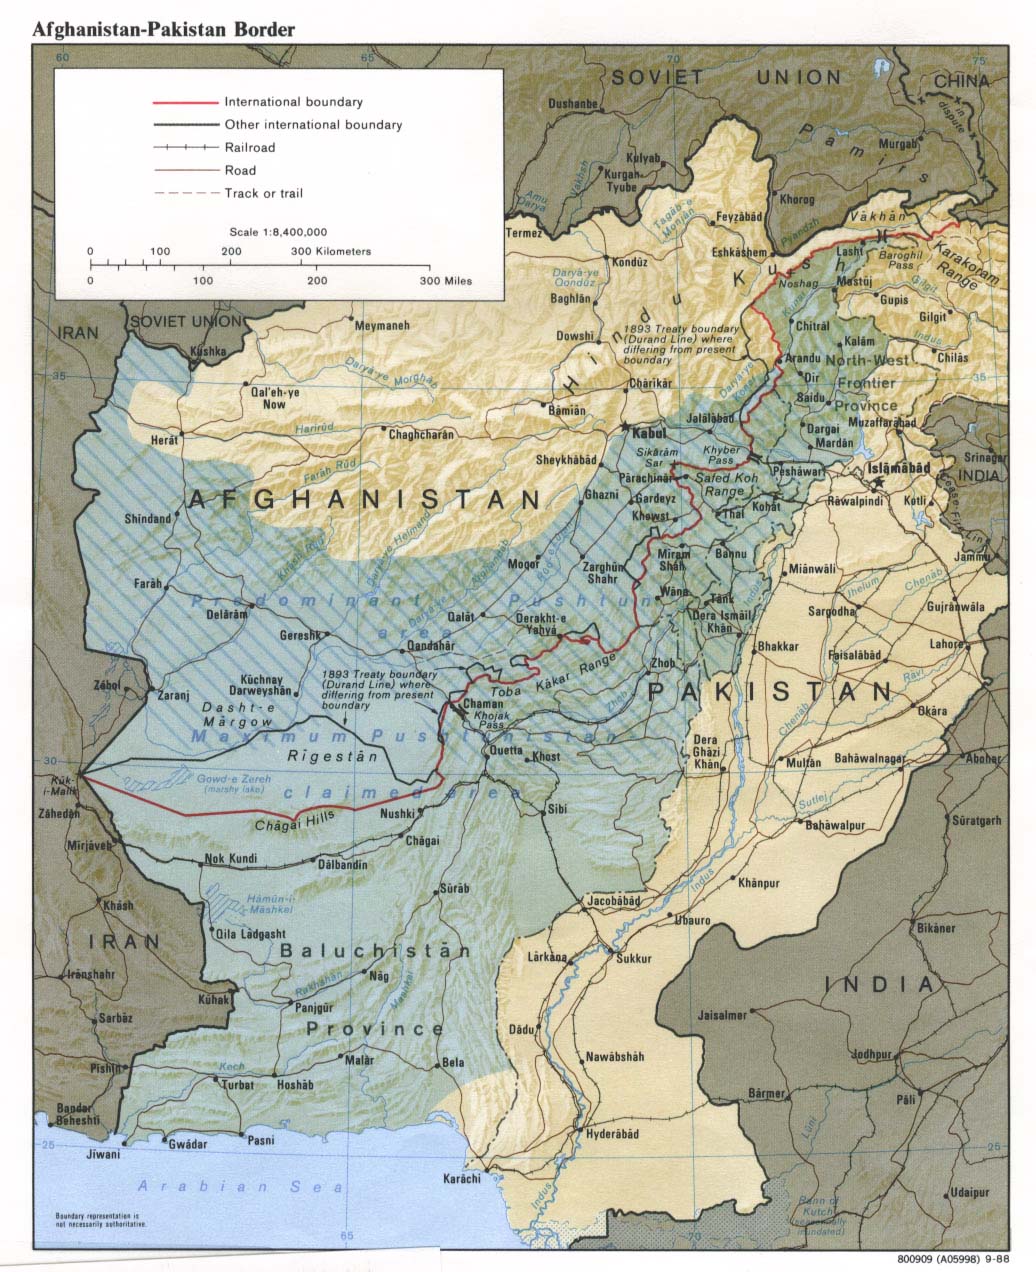 Baluch and Pashtun dispersion between Pakistan and Afghanistan